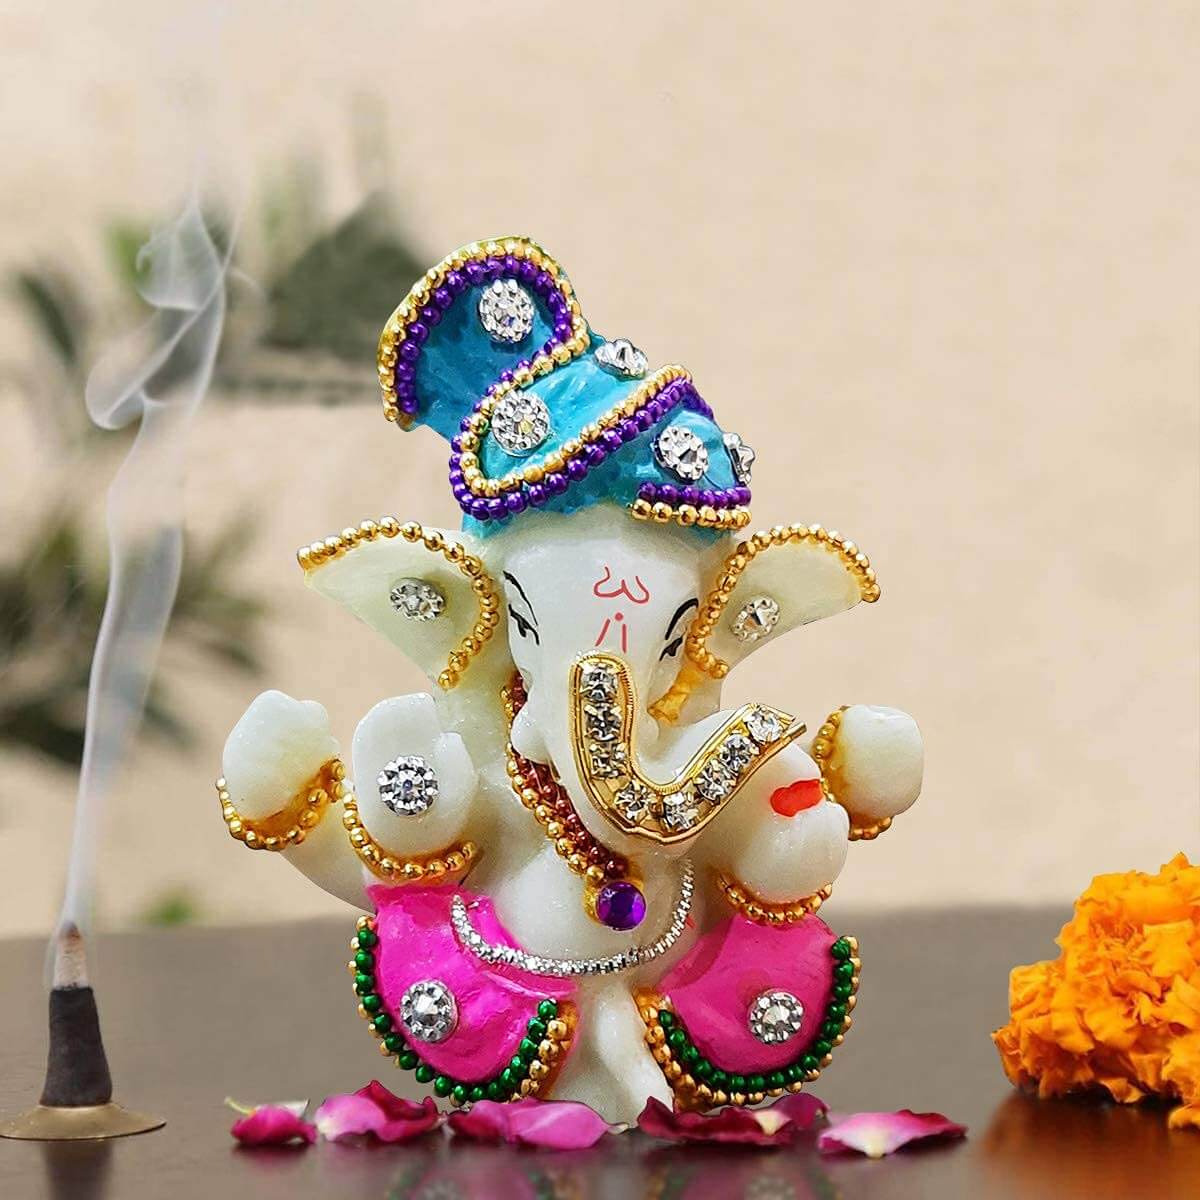 White Stone God Ganesha Statue for Car Dashboard and Home Decor, 3x2x3 Inches (Multicolour) Mangal Fashions | Indian Home Decor and Craft